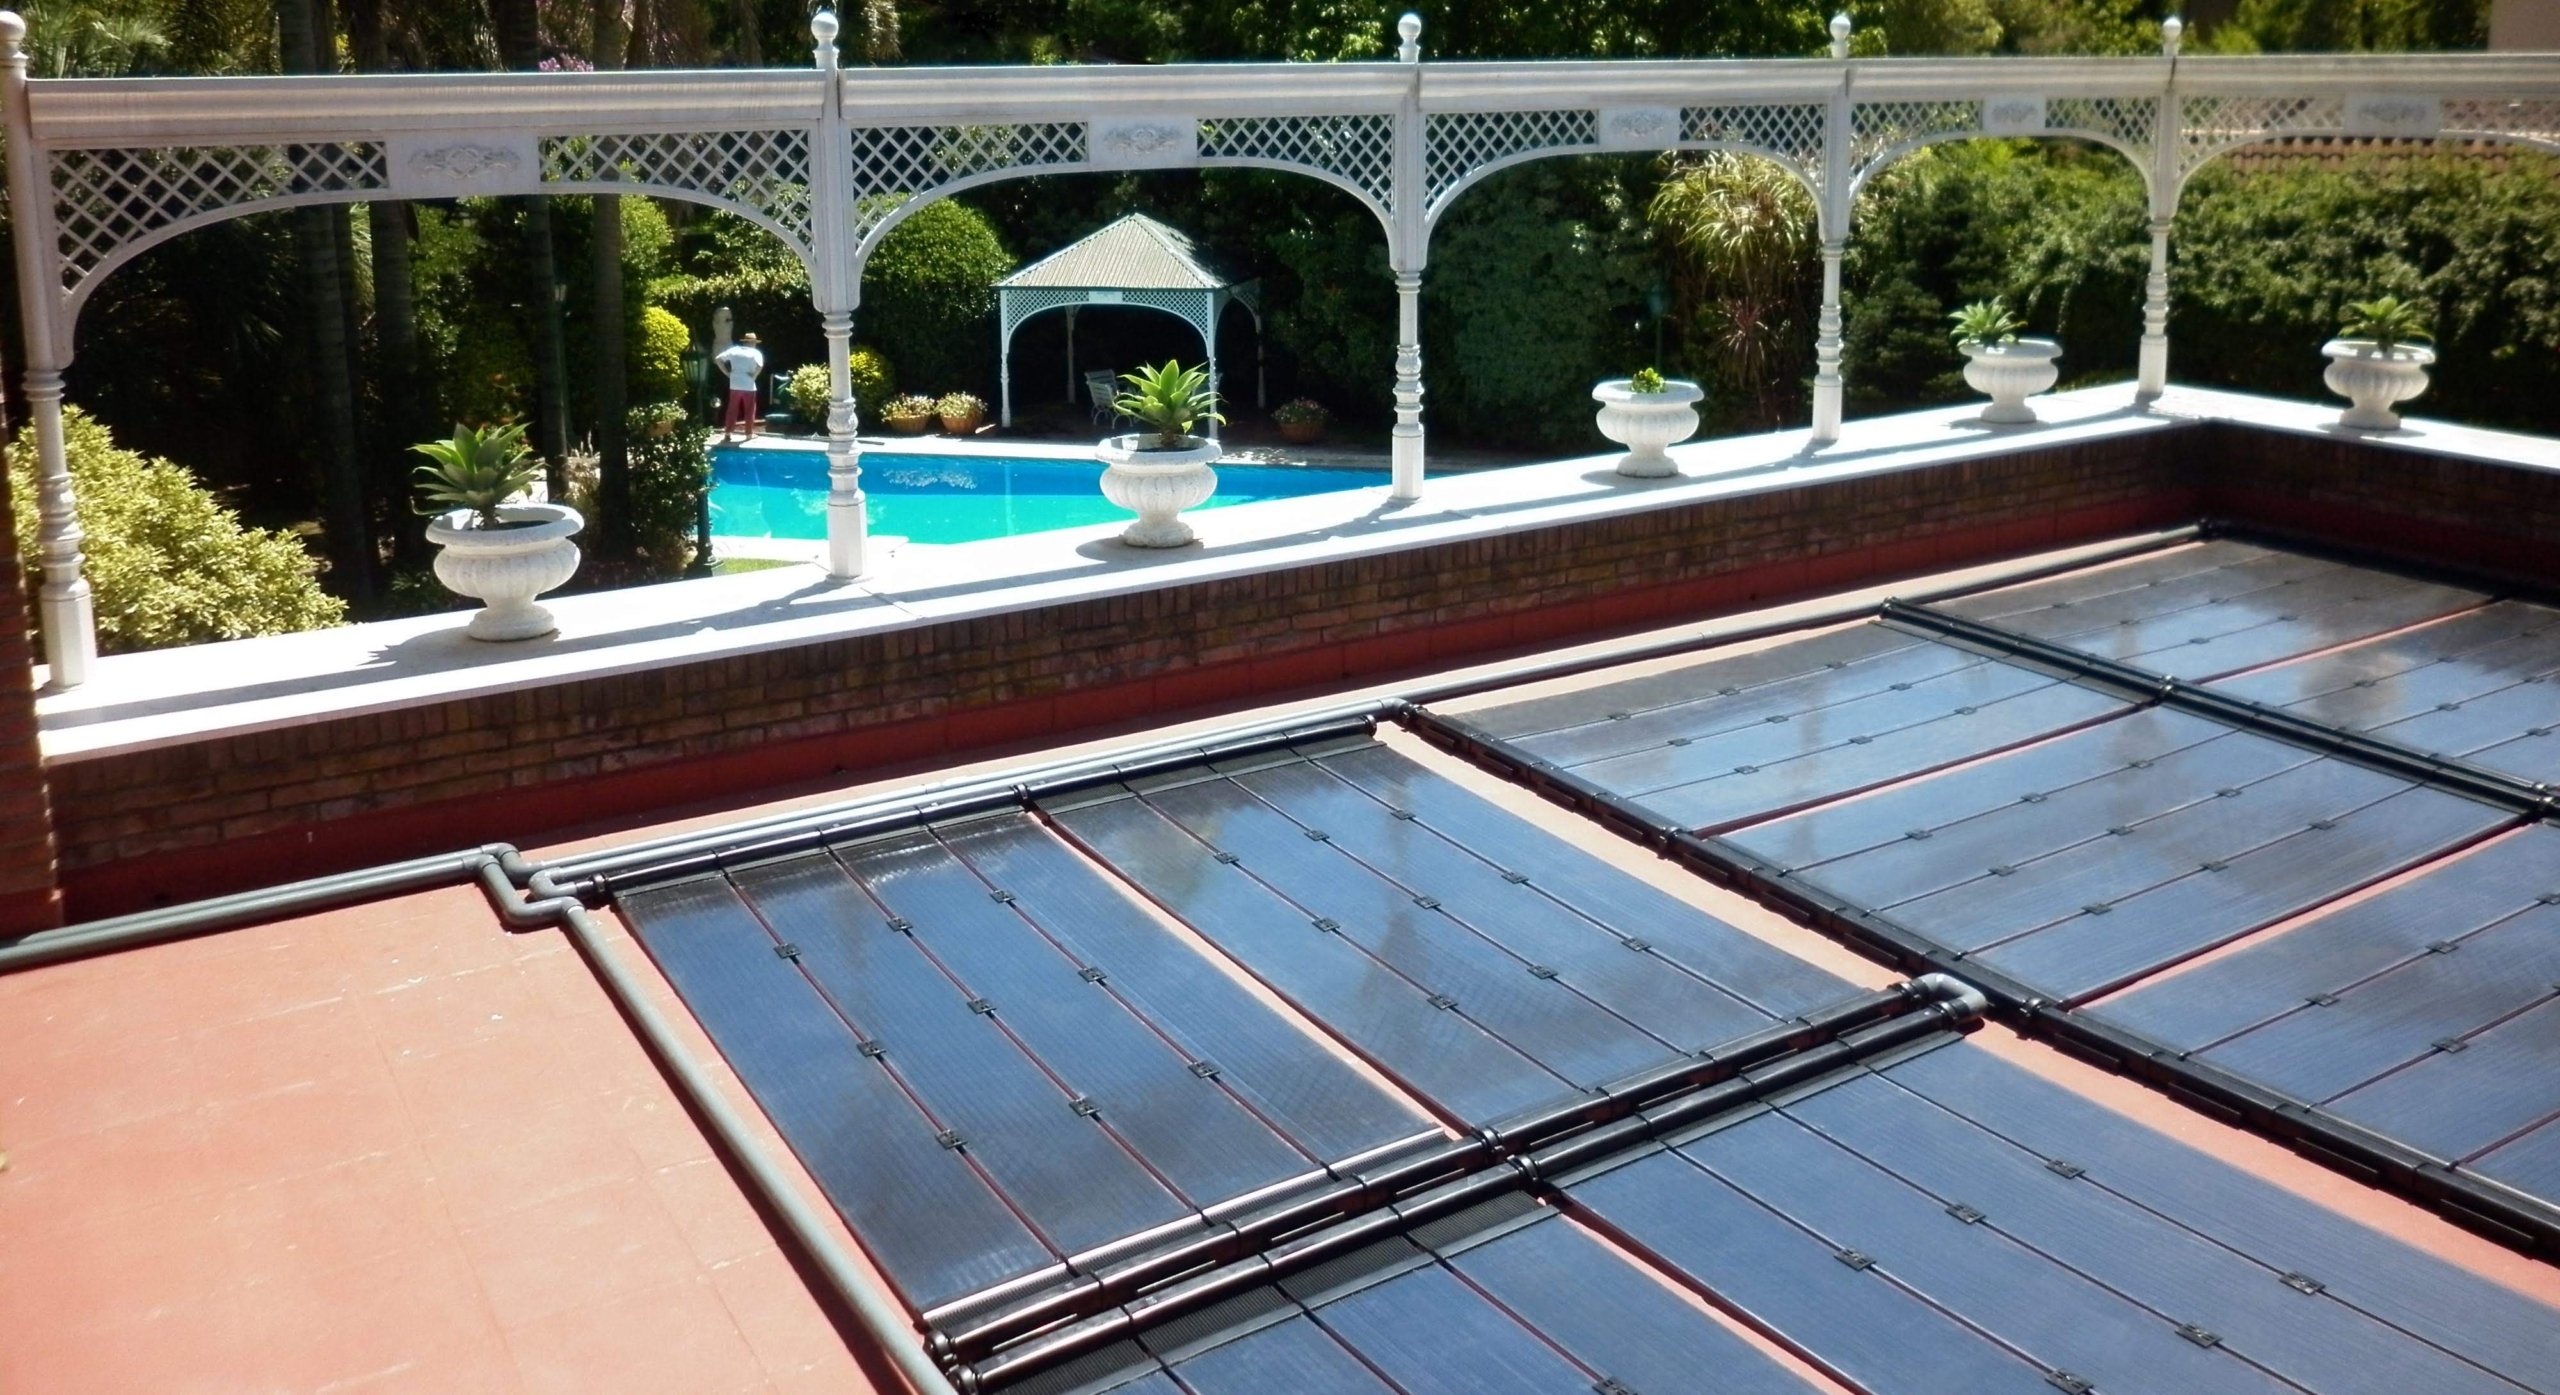 solar pannels used to rise pools temperature 